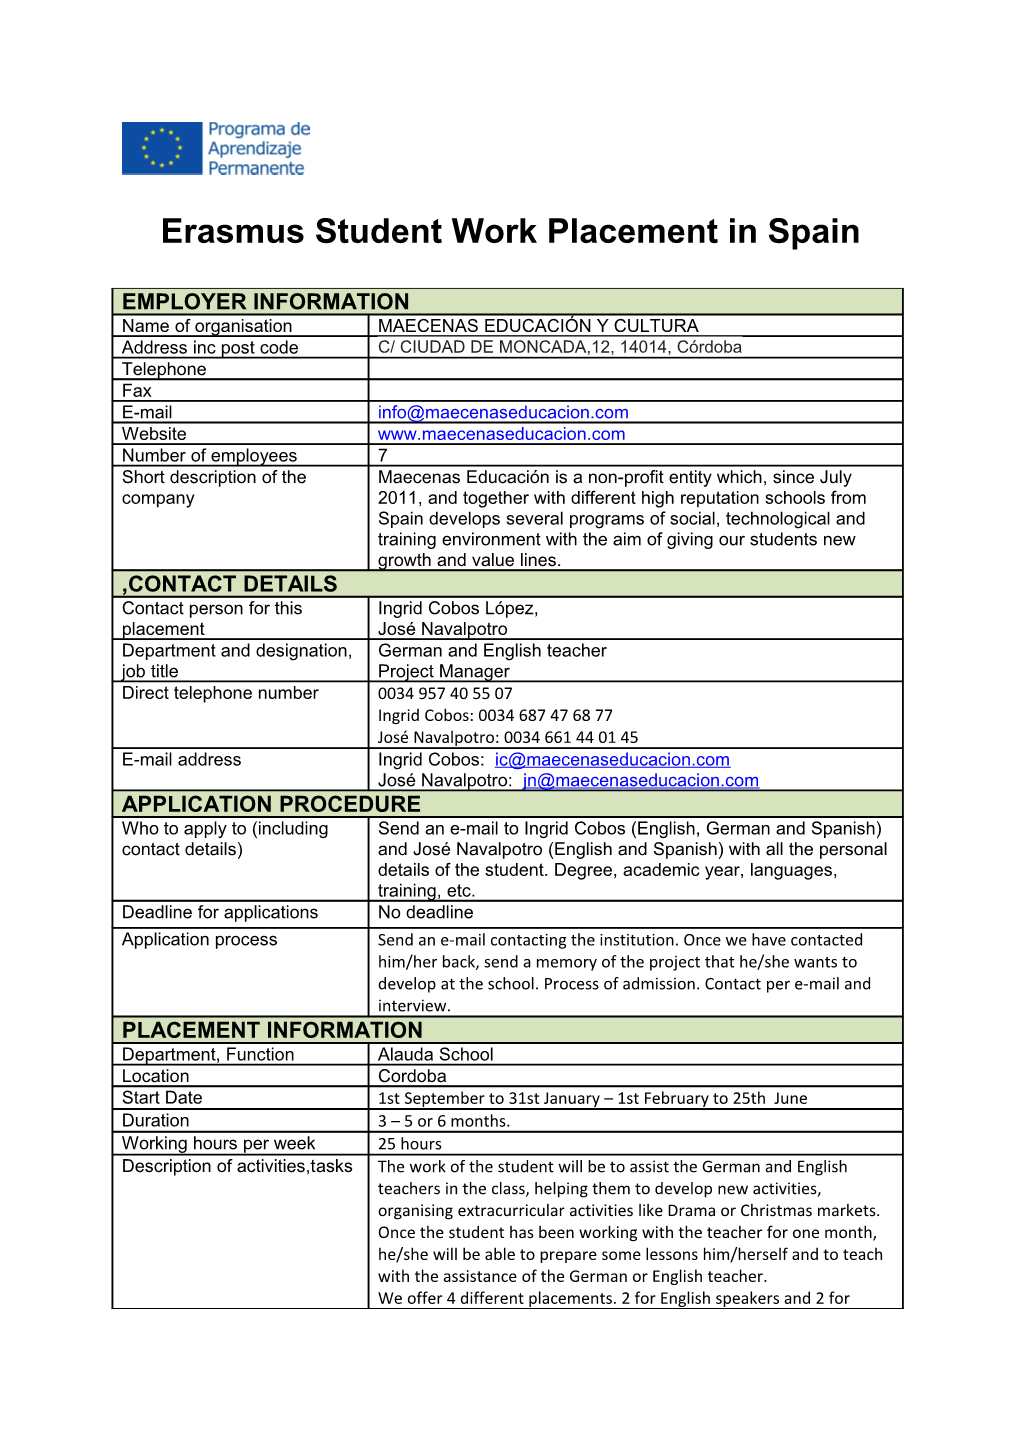 Erasmus Student Work Placement in the UK s10